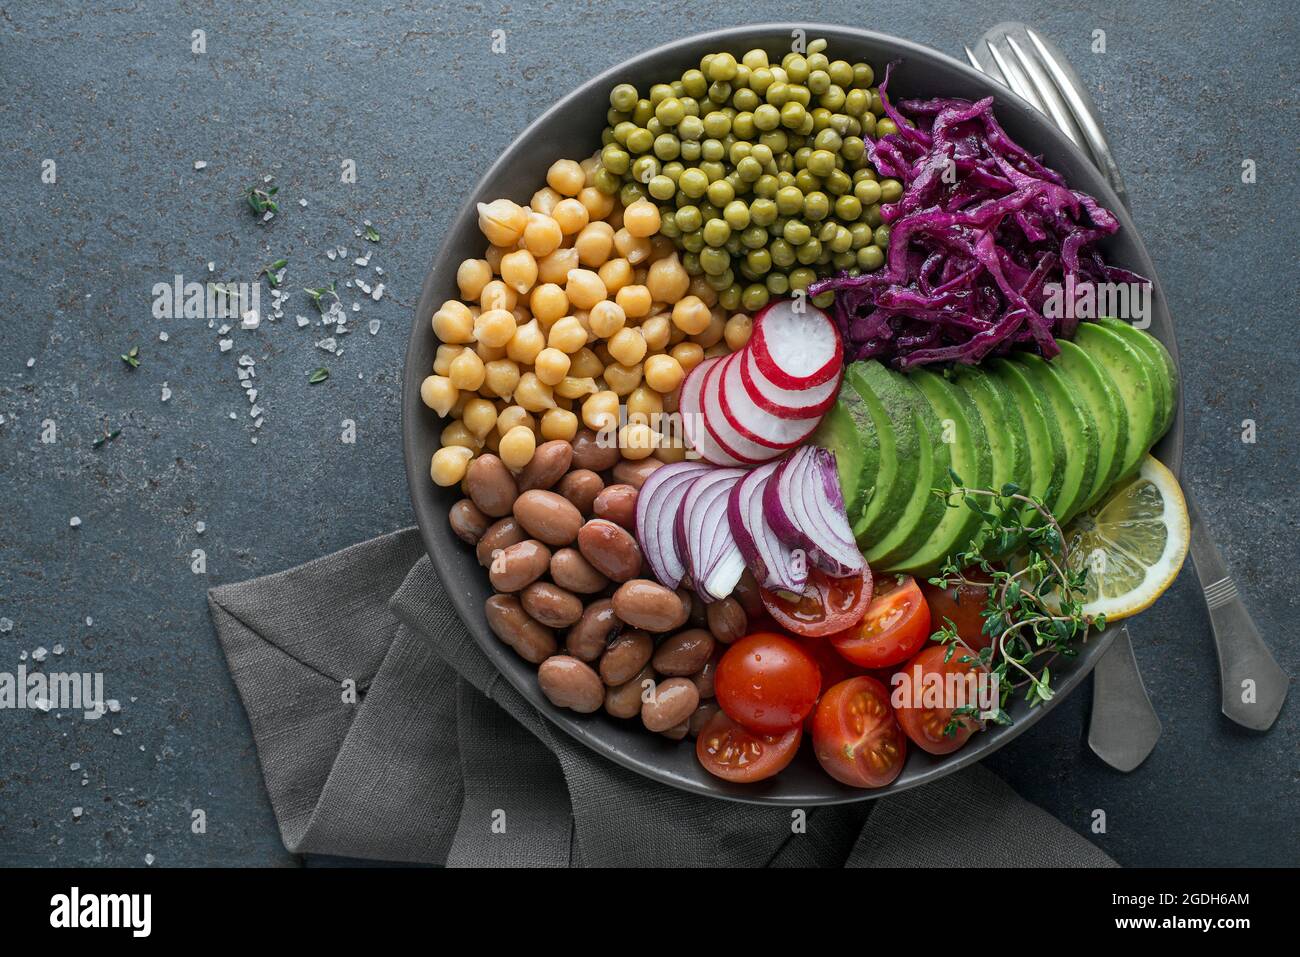 Healthy vegan lunch bowl. Avocado, chickpeas, tomato, red cabbage, green peas, red onion and radish vegetables salad. Healthy balanced vegetarian food Stock Photo